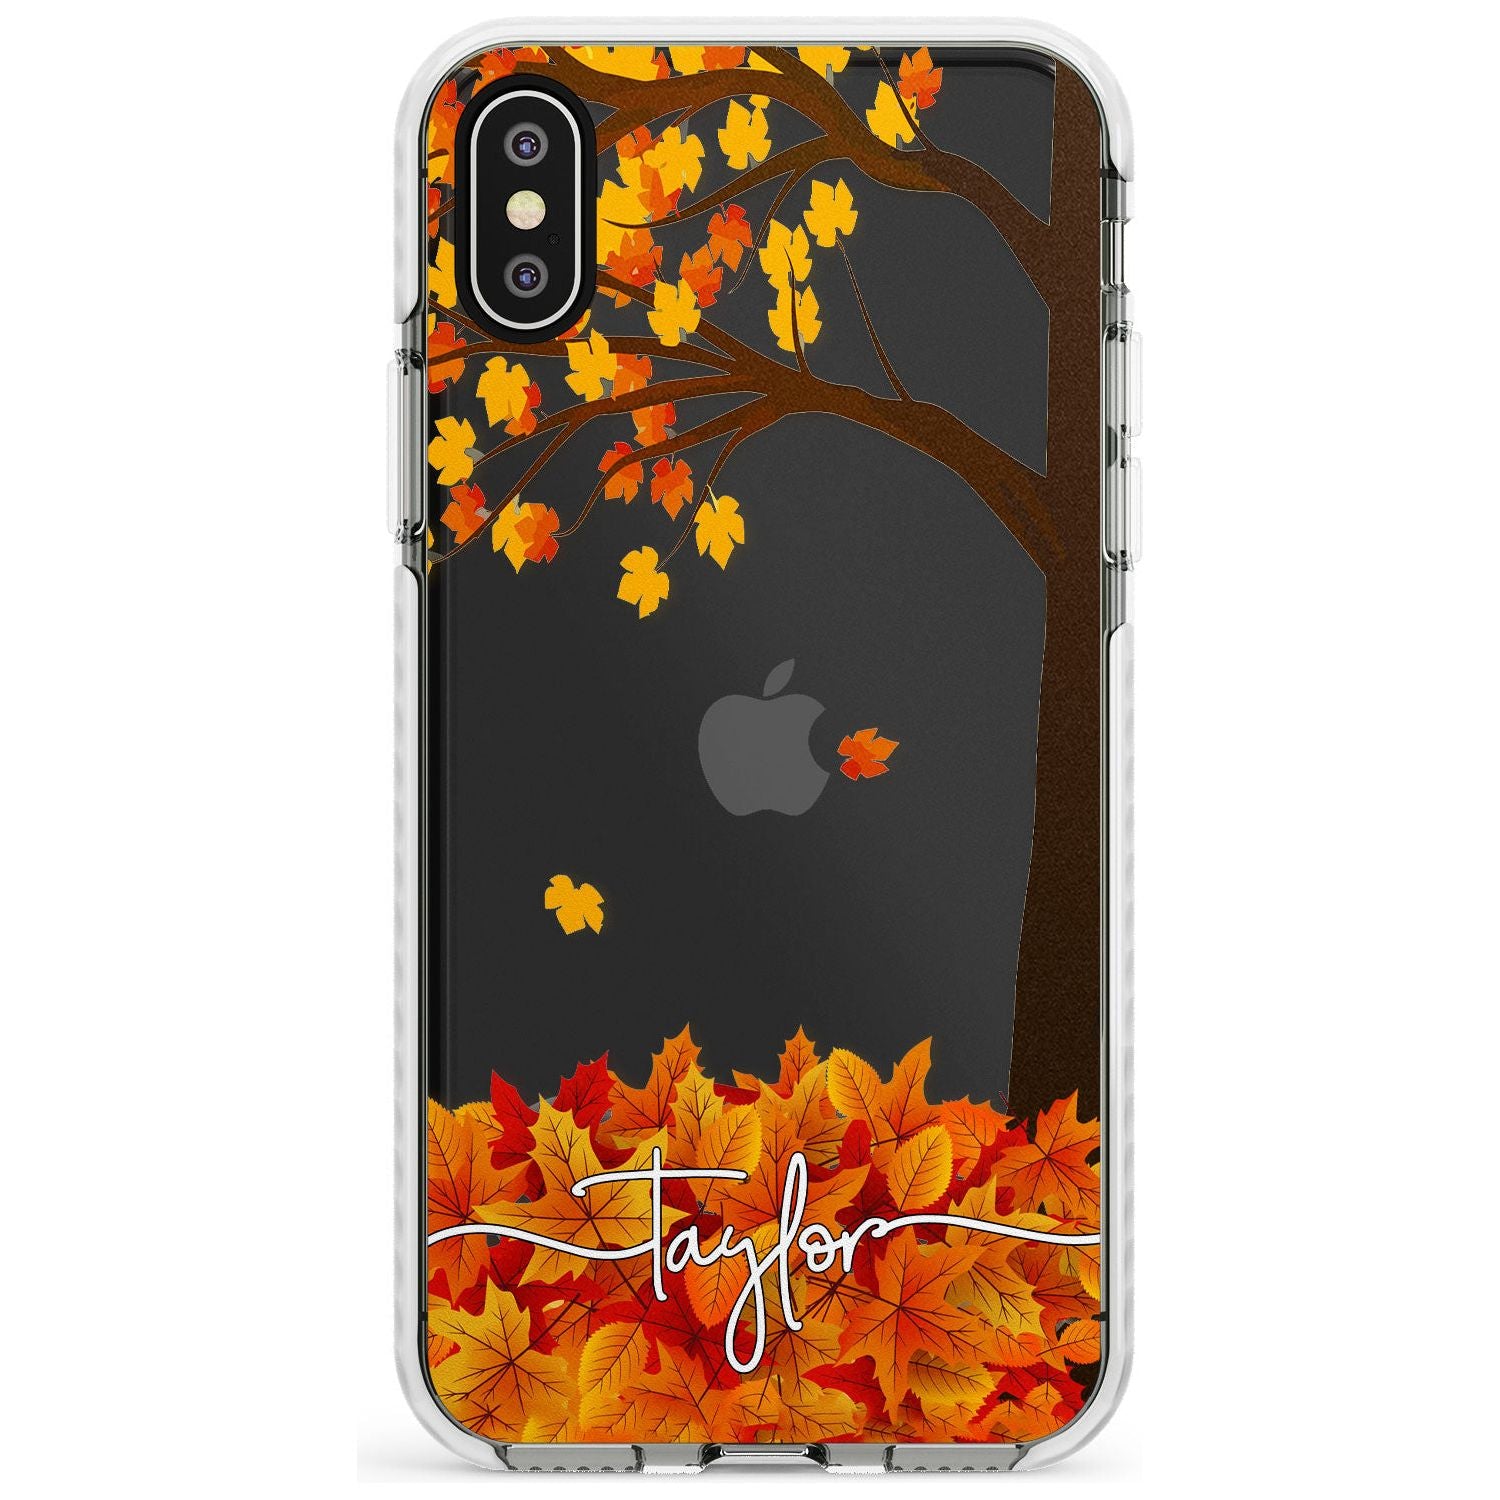 Personalised Autumn Leaves Impact Phone Case for iPhone X XS Max XR